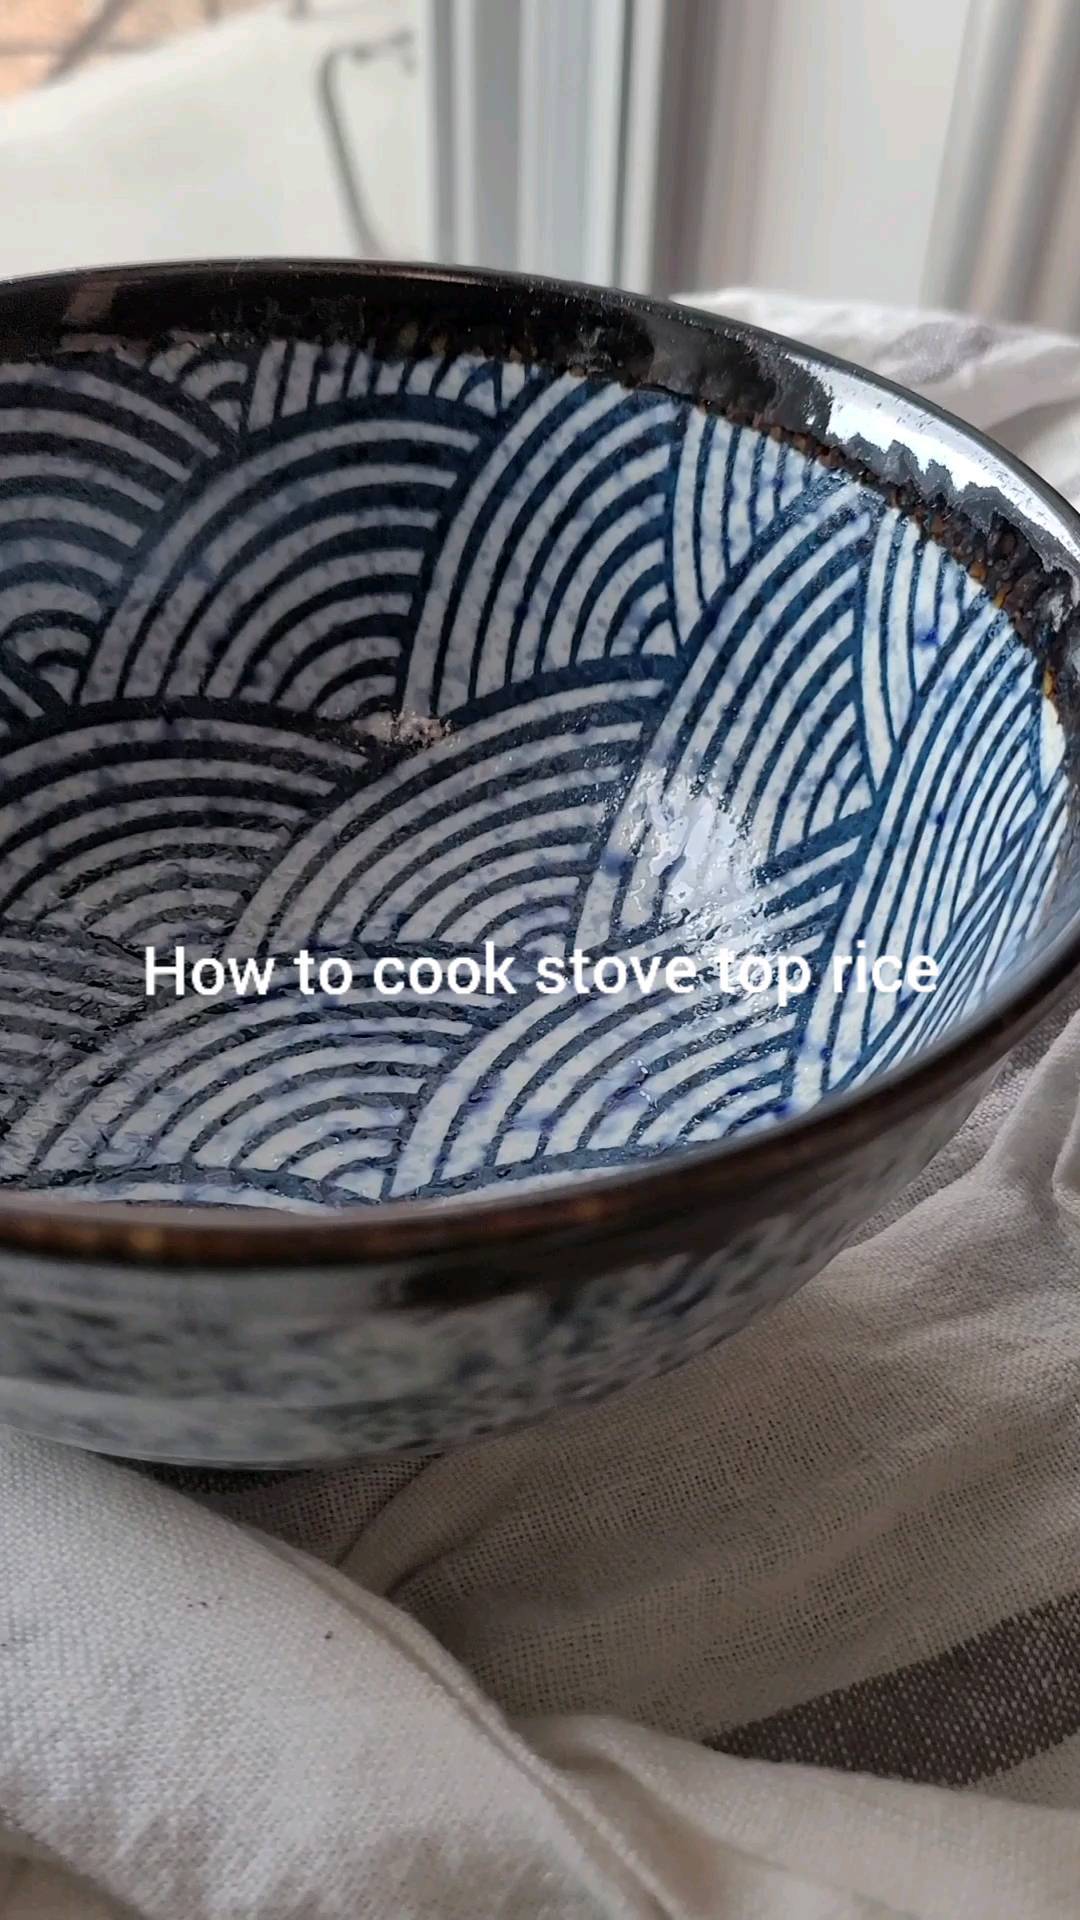 Tried posting this yday but had ig issues...apparently a lot of people think that cooking rice on the stove top is difficult soo here's a tutorial? I haven't owned a rice cooker in 4 years and I eat rice almost every day, this is basically foolproof. You just have to remember to lower the heat halfway and turn off the heat when it's done (yes I have burned pots before ok that doesn't mean I wanna spend $ and counter space on a rice cooker)

To understand the finger method, the general way is that you add water until it reaches your first knuckle. This can be a bit unreliable depending on your pot size and type of rice, what I like to do is touch my finger to the bottom of the pot and take note of where the rice reaches, and then double that height is where the water should reach. Similarly with the palm you use the height as a guideline in relation to the height of the rice (I approximate how much higher the water should be above my palm because I know how much there should be relatively since I cook this amount often). 

#rice #cooking #cookingbasics #cooking101